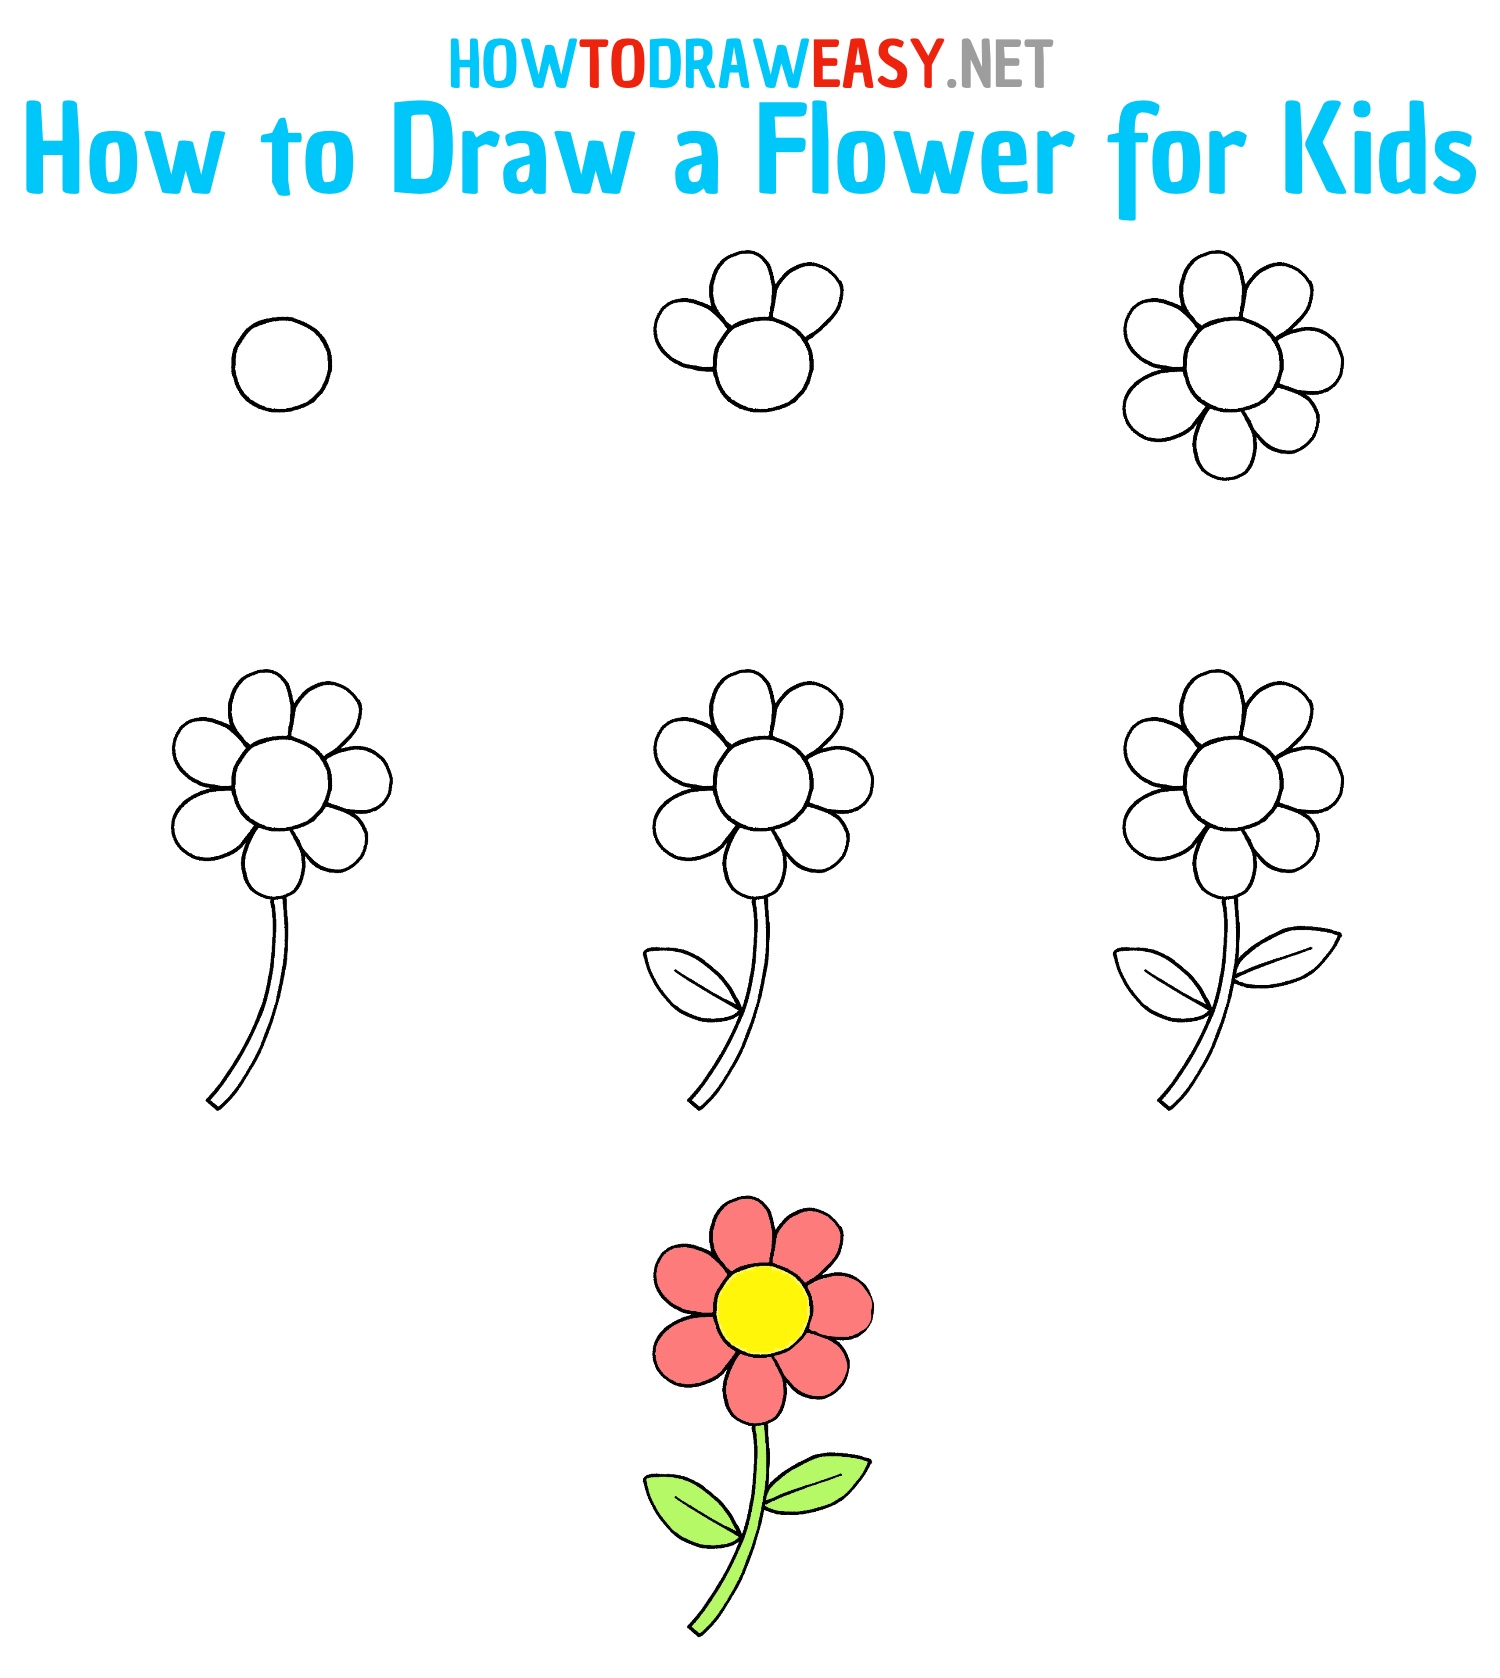 How to Draw a Flower Step by Step